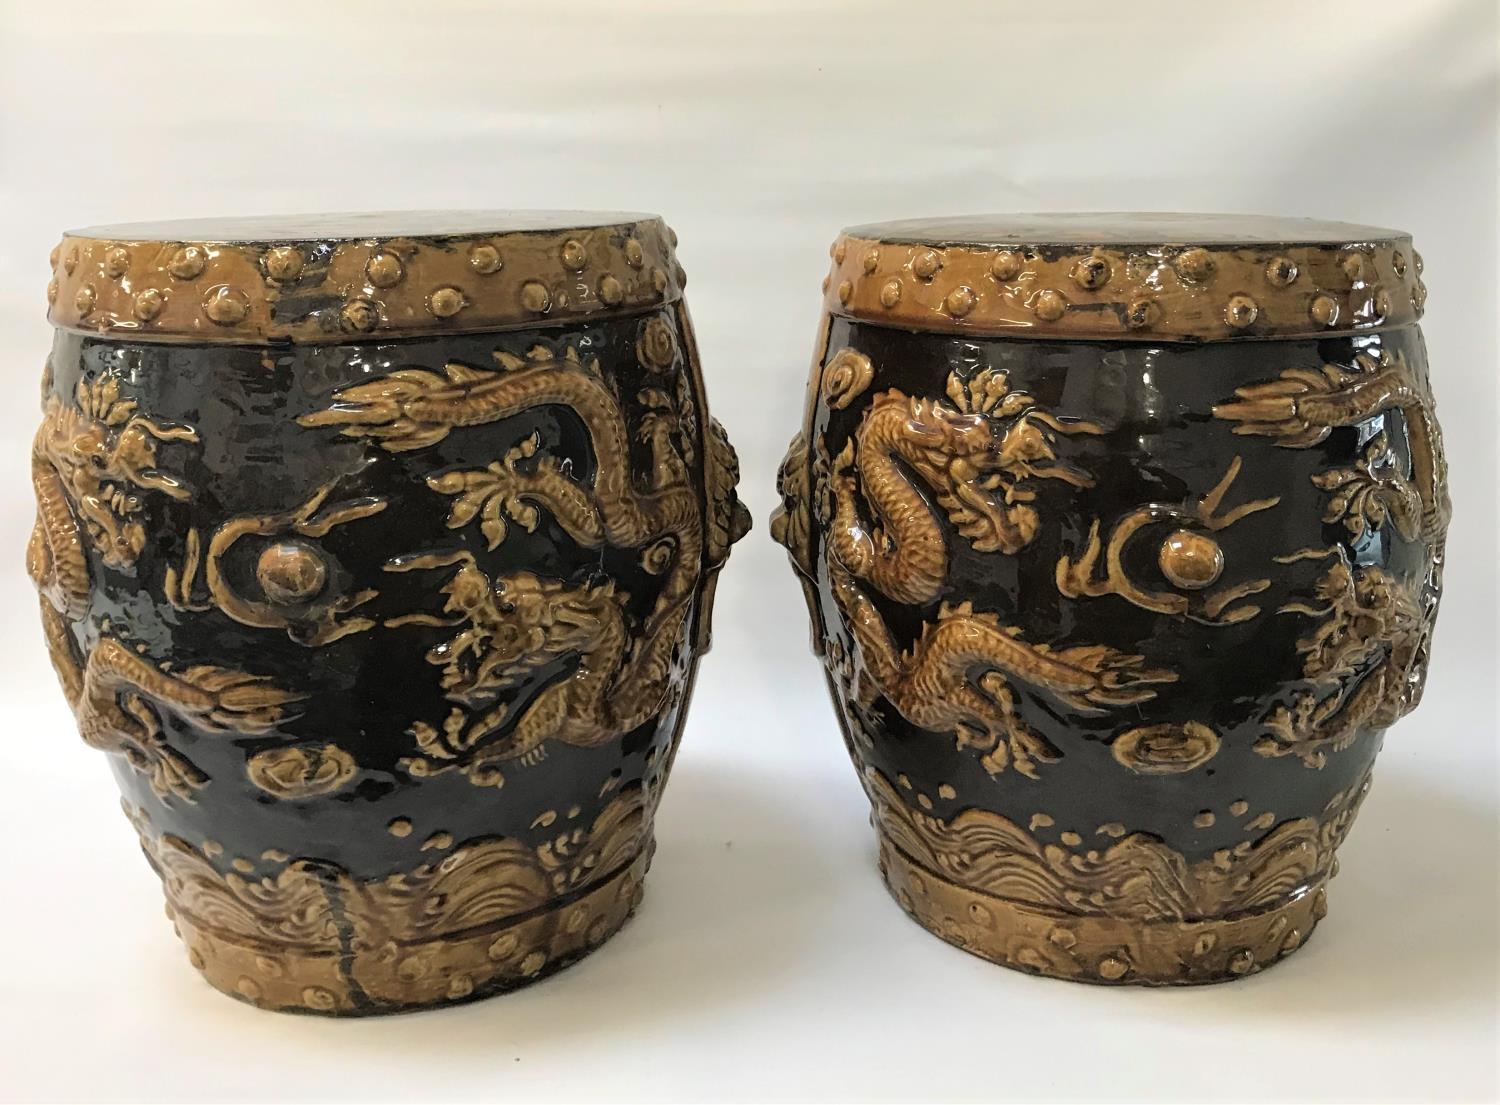 PAIR OF CHINESE GARDEN SEATS of barrell form in brown glaze with lion mask side handles and